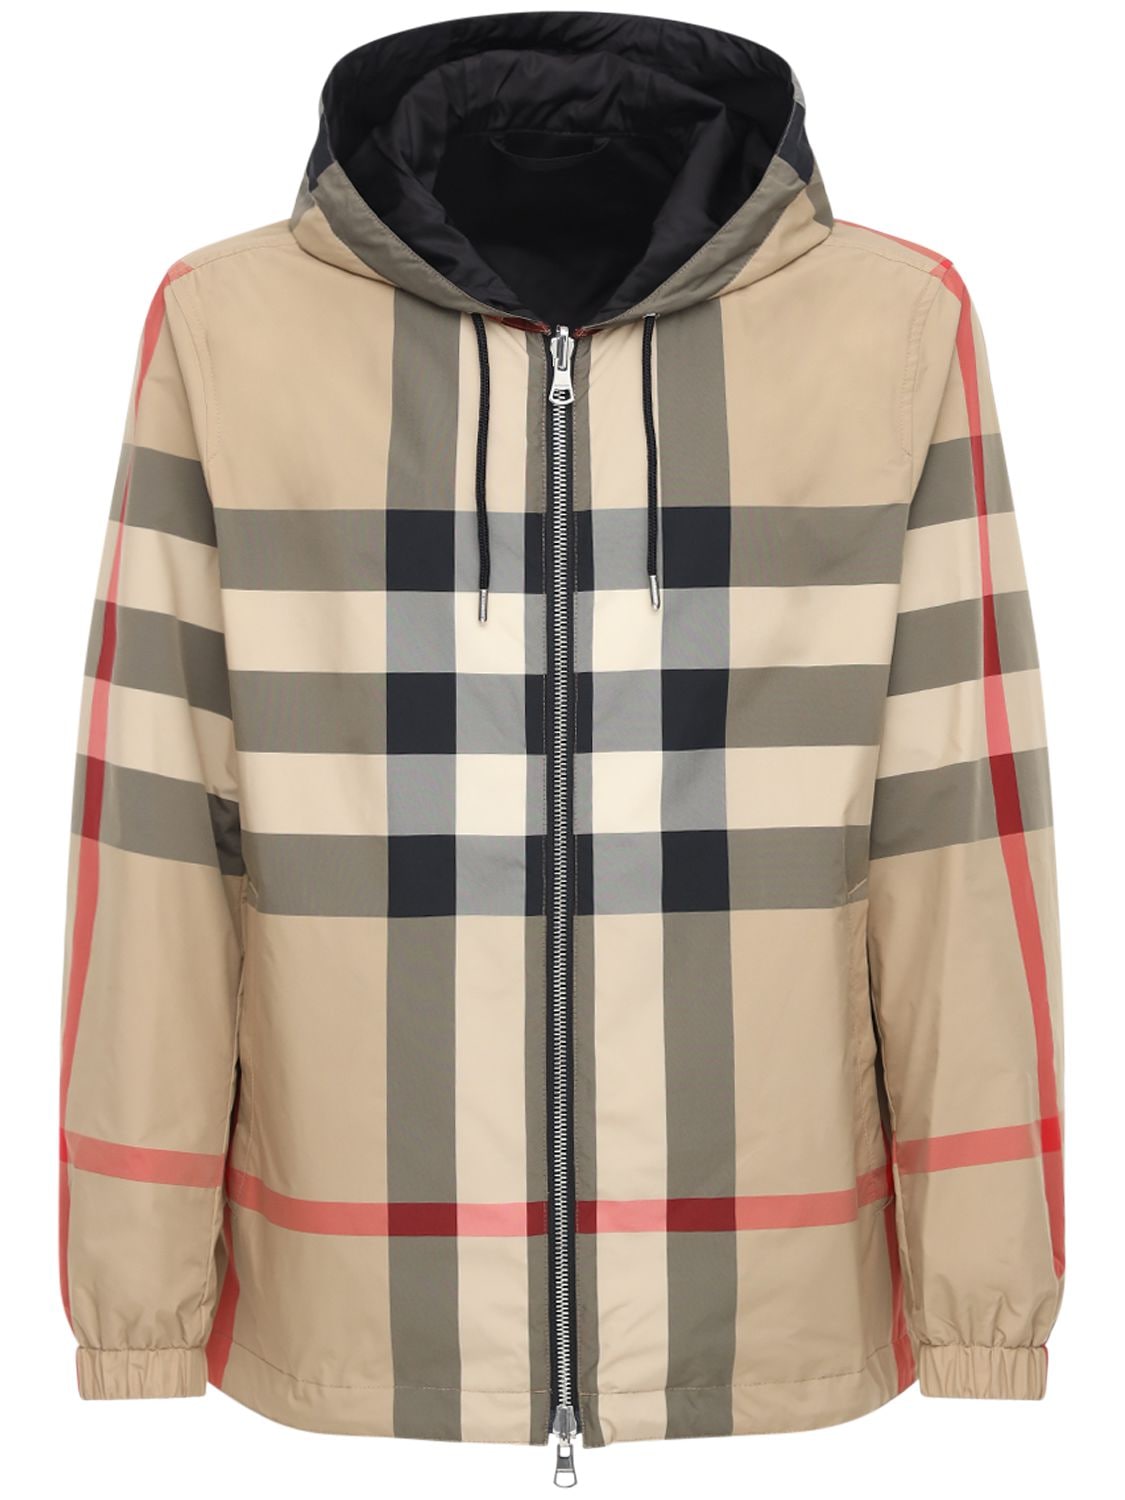 Burberry Stretton Tech Check Zip Jacket In Archive Beige